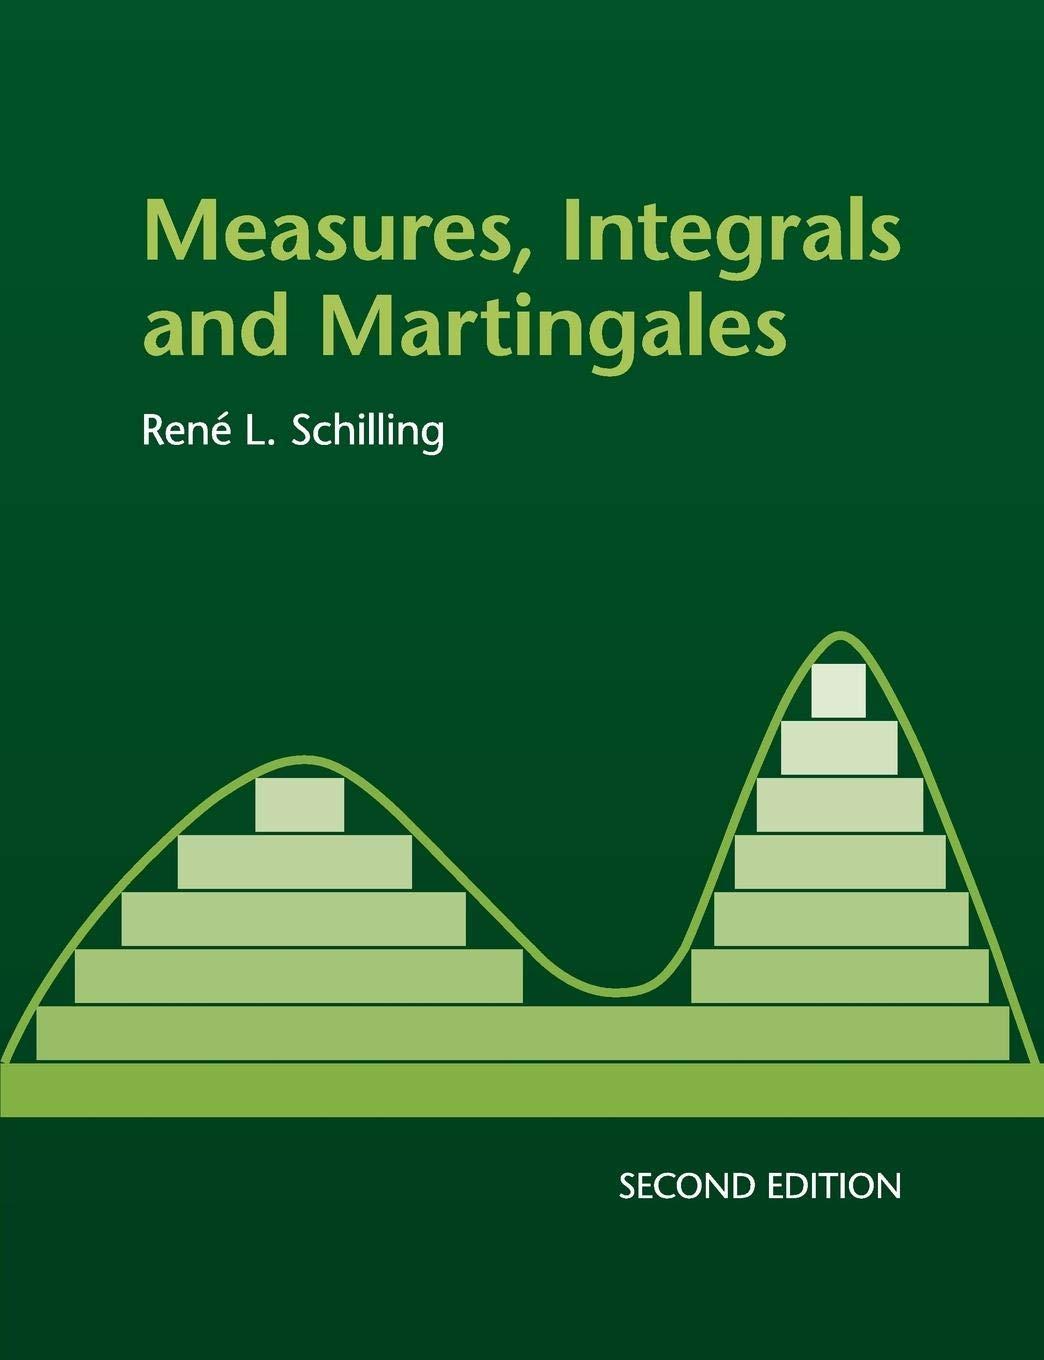 measures integrals and martingales 2nd edition rené l. schilling 1316620247, 978-1316620243